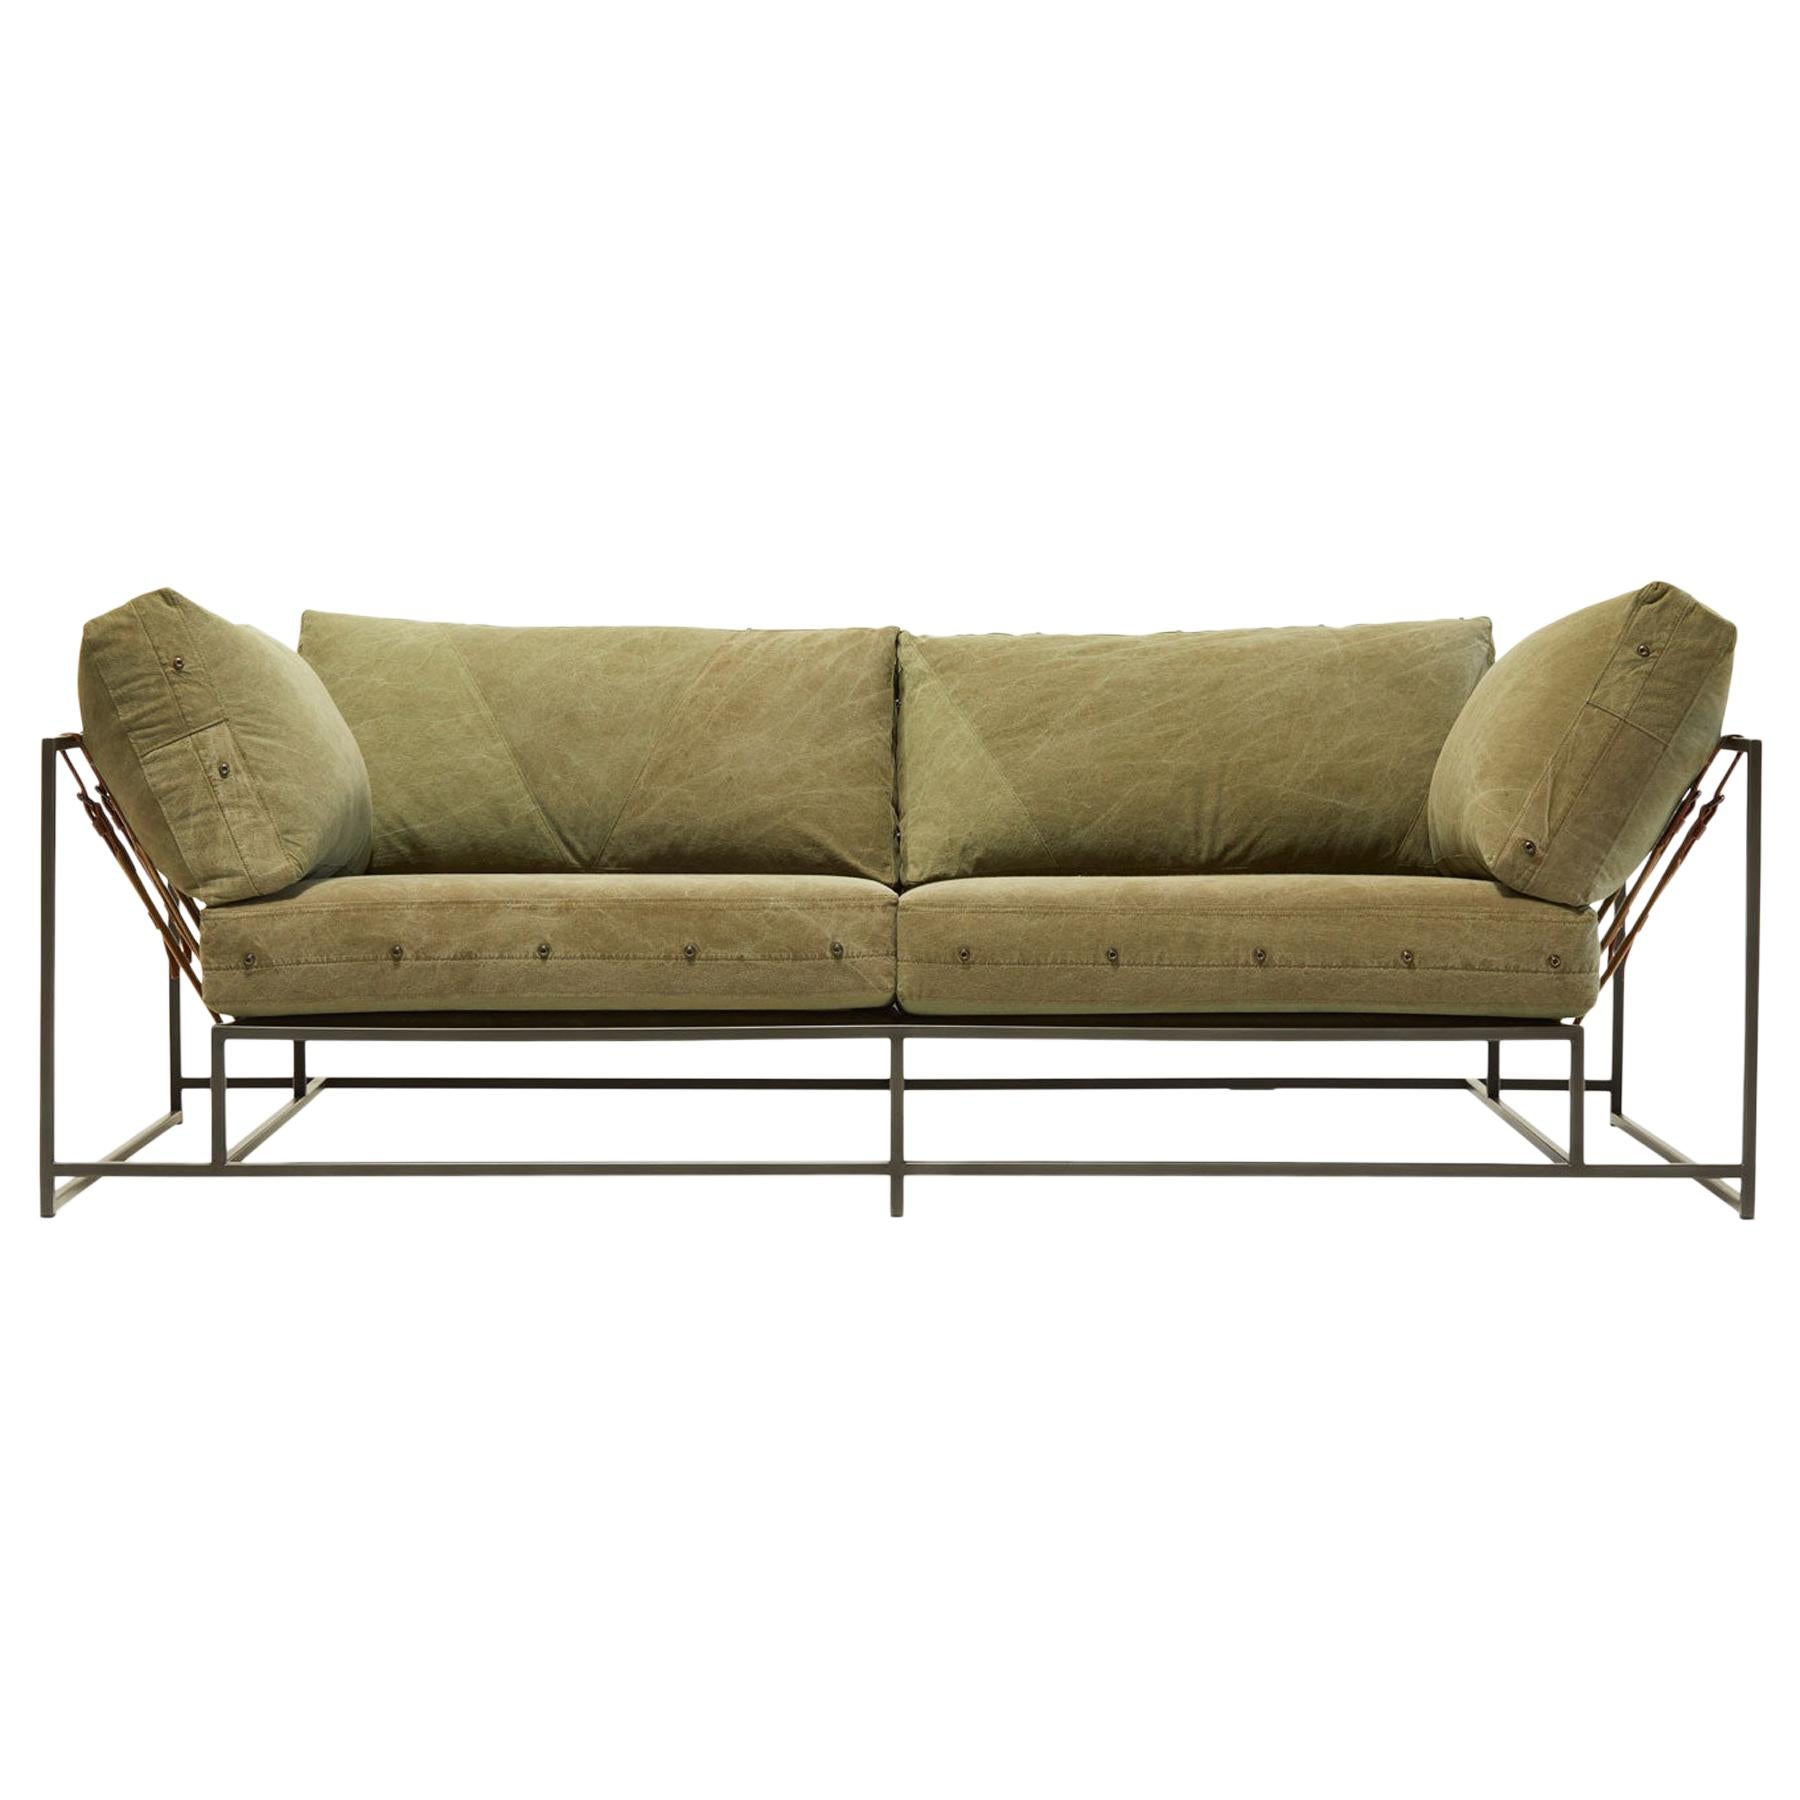 Vintage Military Canvas and Blackened Steel V2 Two-Seat Sofa